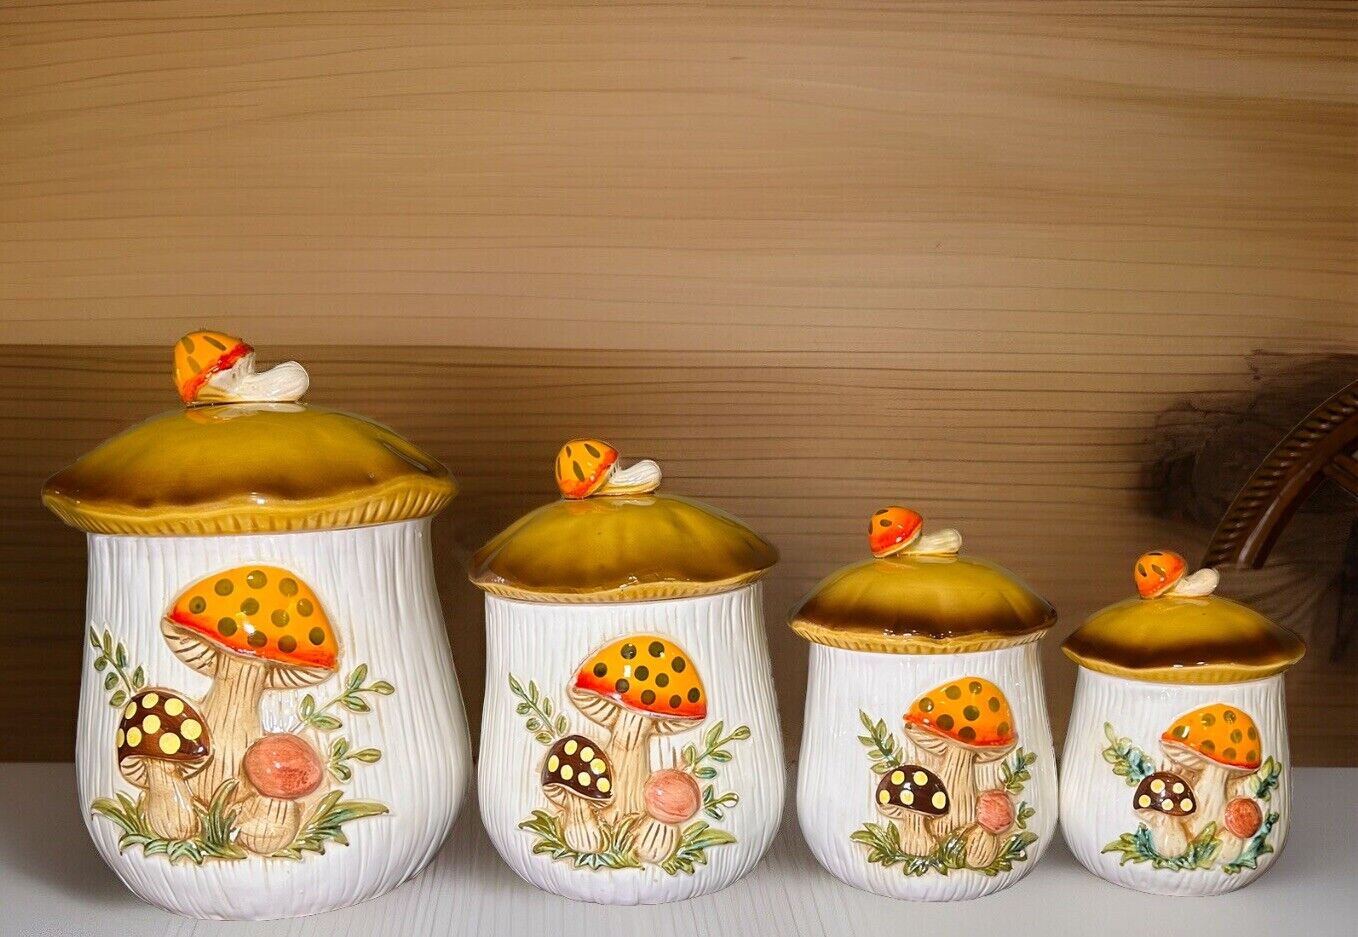 Vintage Retro Merry Mushroom 4 Piece Matching Canister Set 2 Sided Sears 1970’s